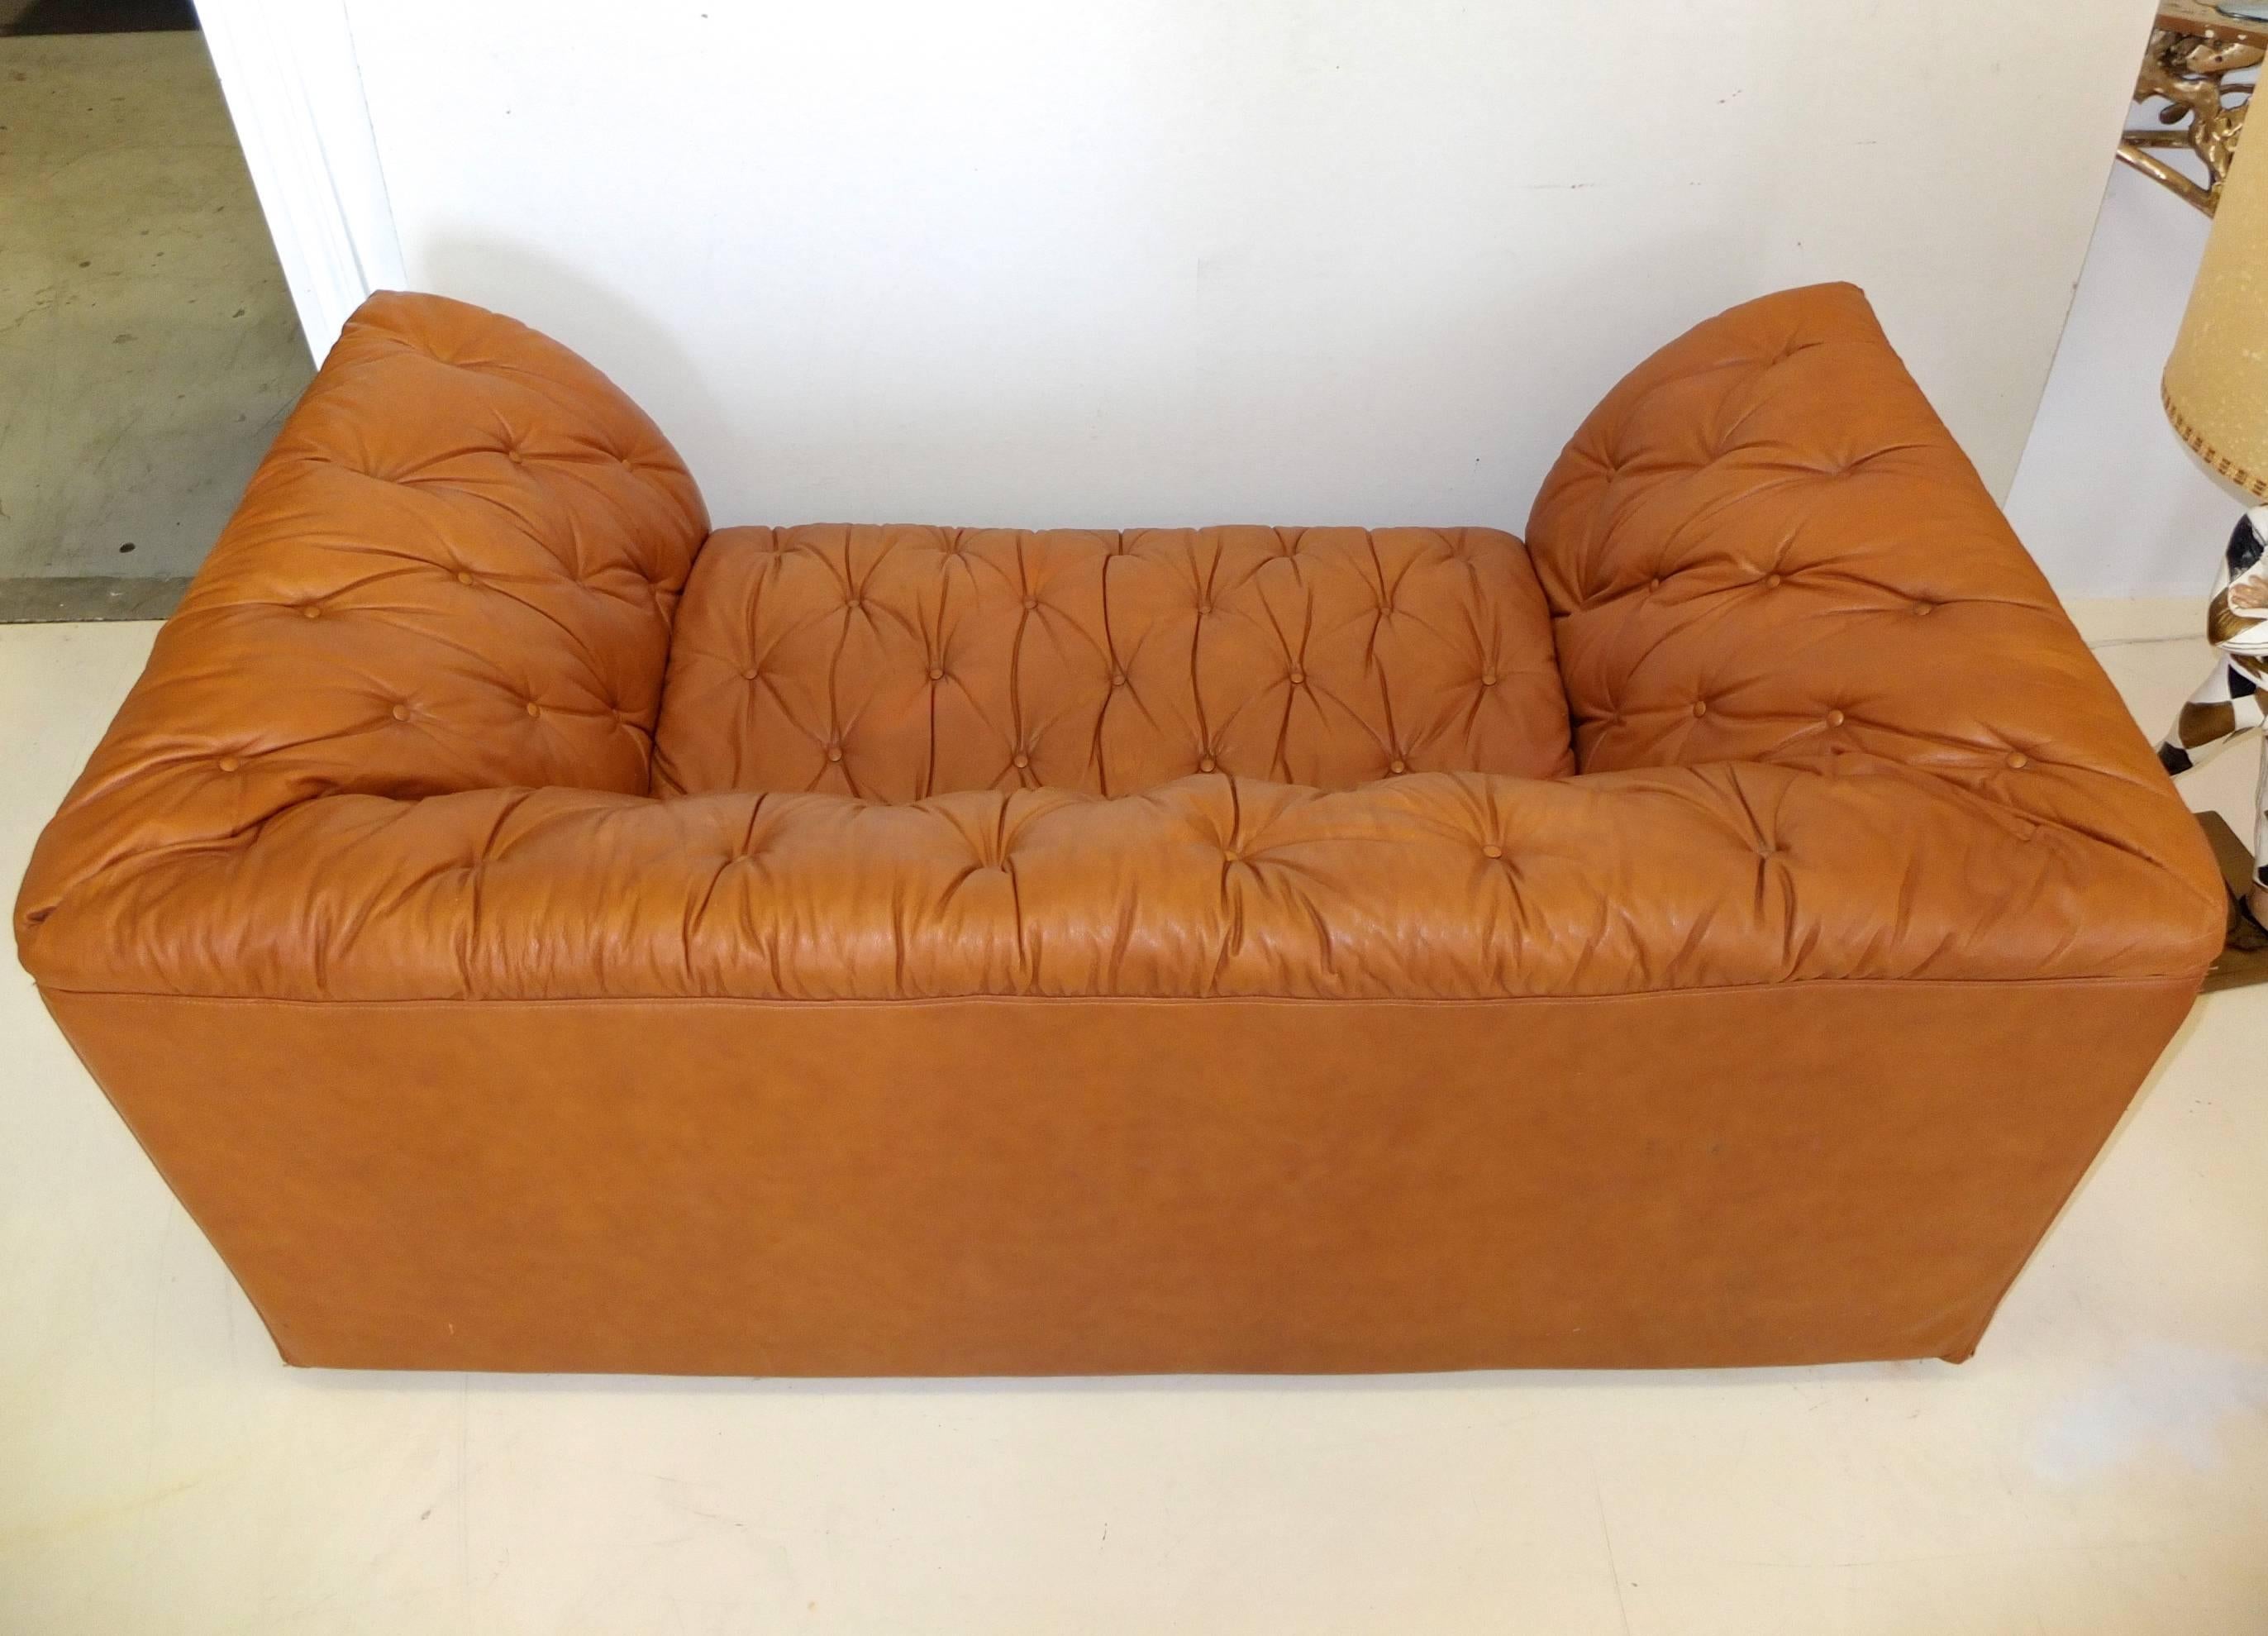 1970's Italian Tufted Leather Sofa by Ambienti Bernini In Good Condition For Sale In Hanover, MA